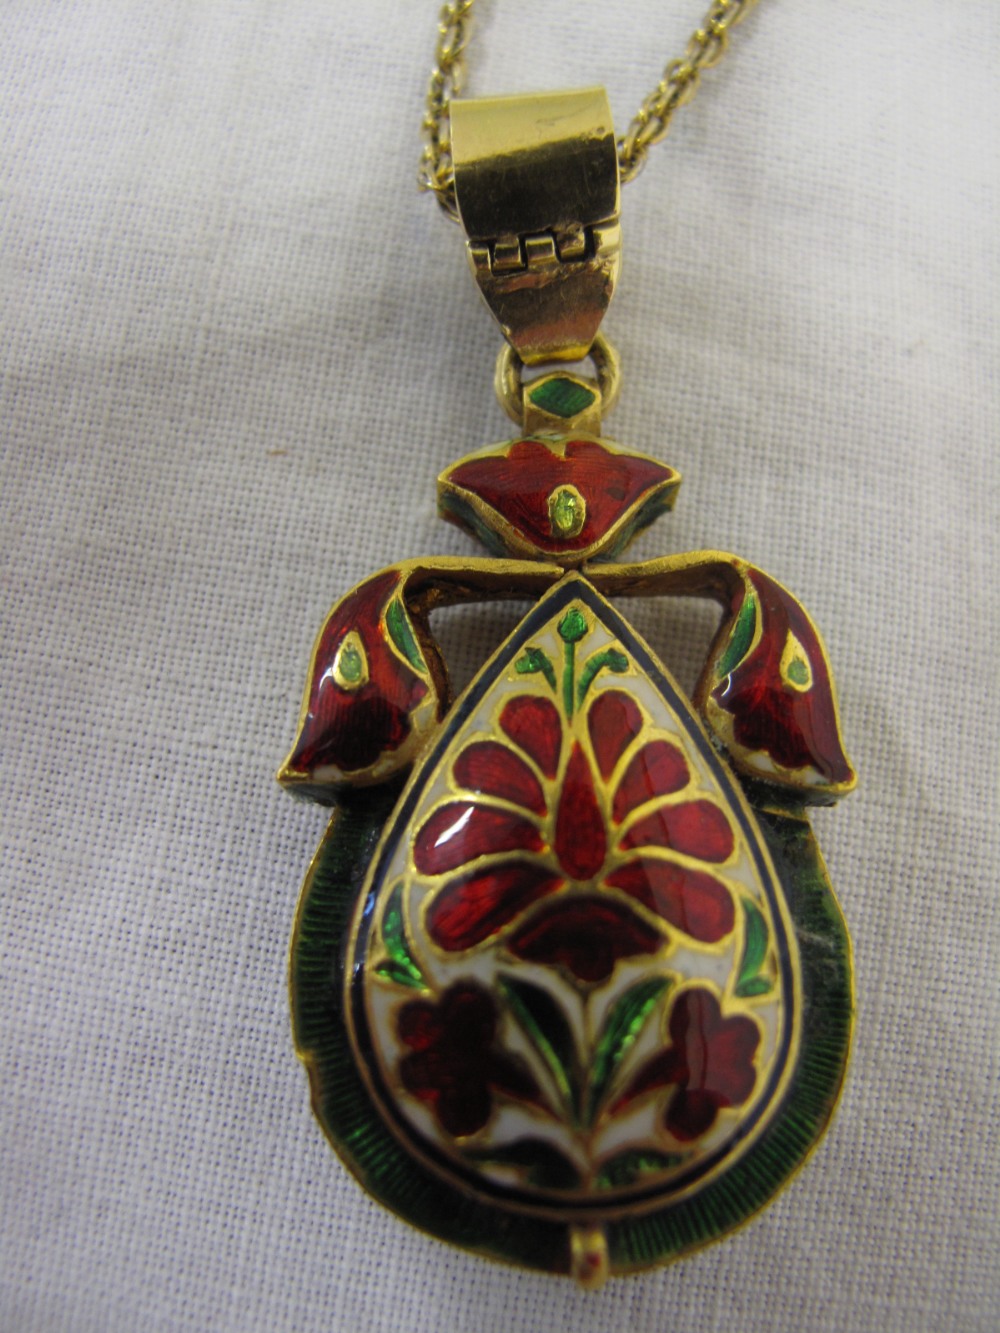 Indian Mogul style jewelled and enamel teardrop shaped pendant with emerald style main stone and